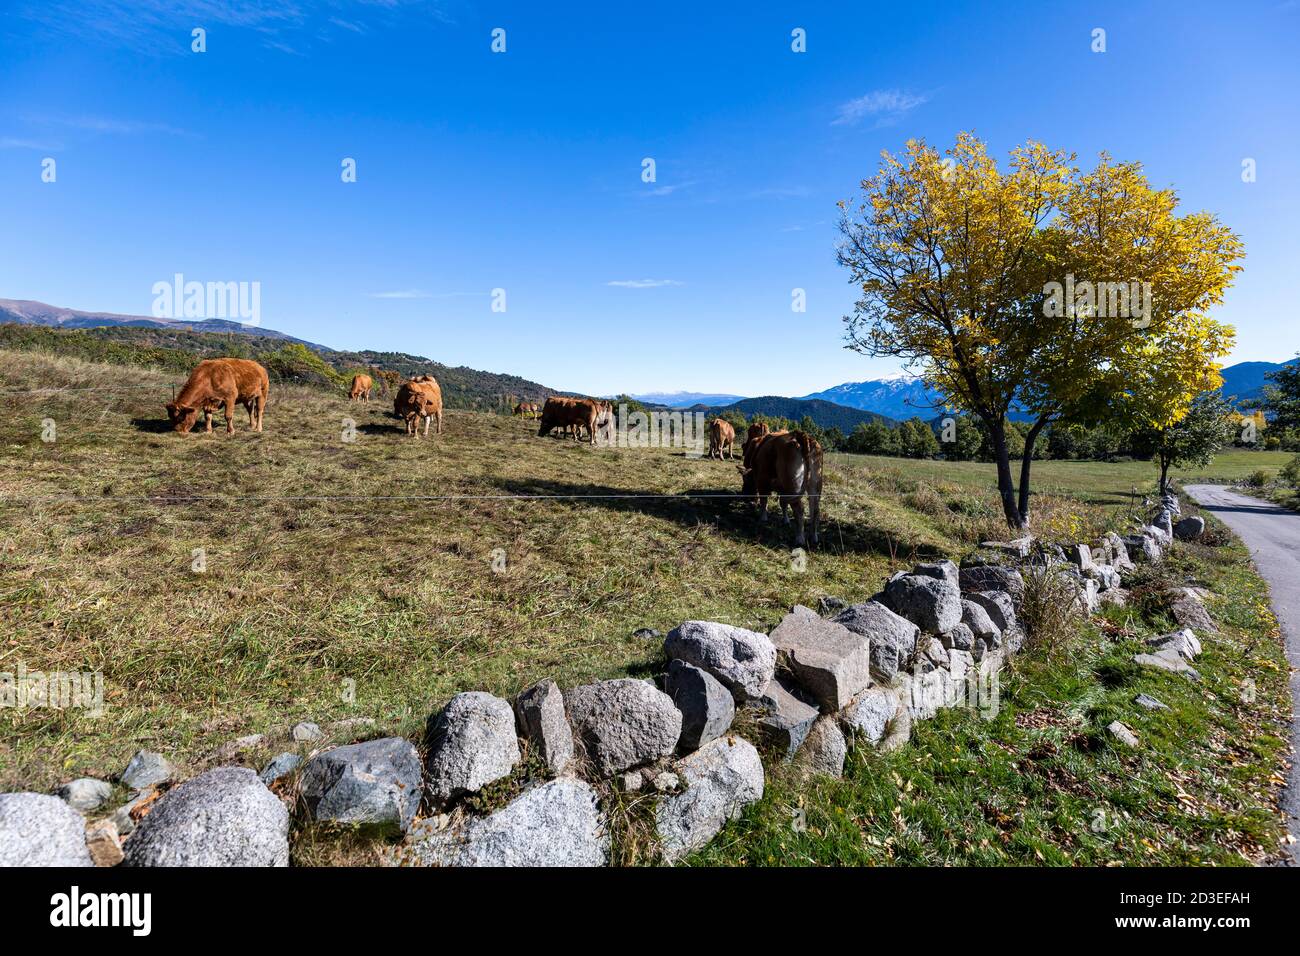 Cows in Cerdanya Mountains. Stock Photo